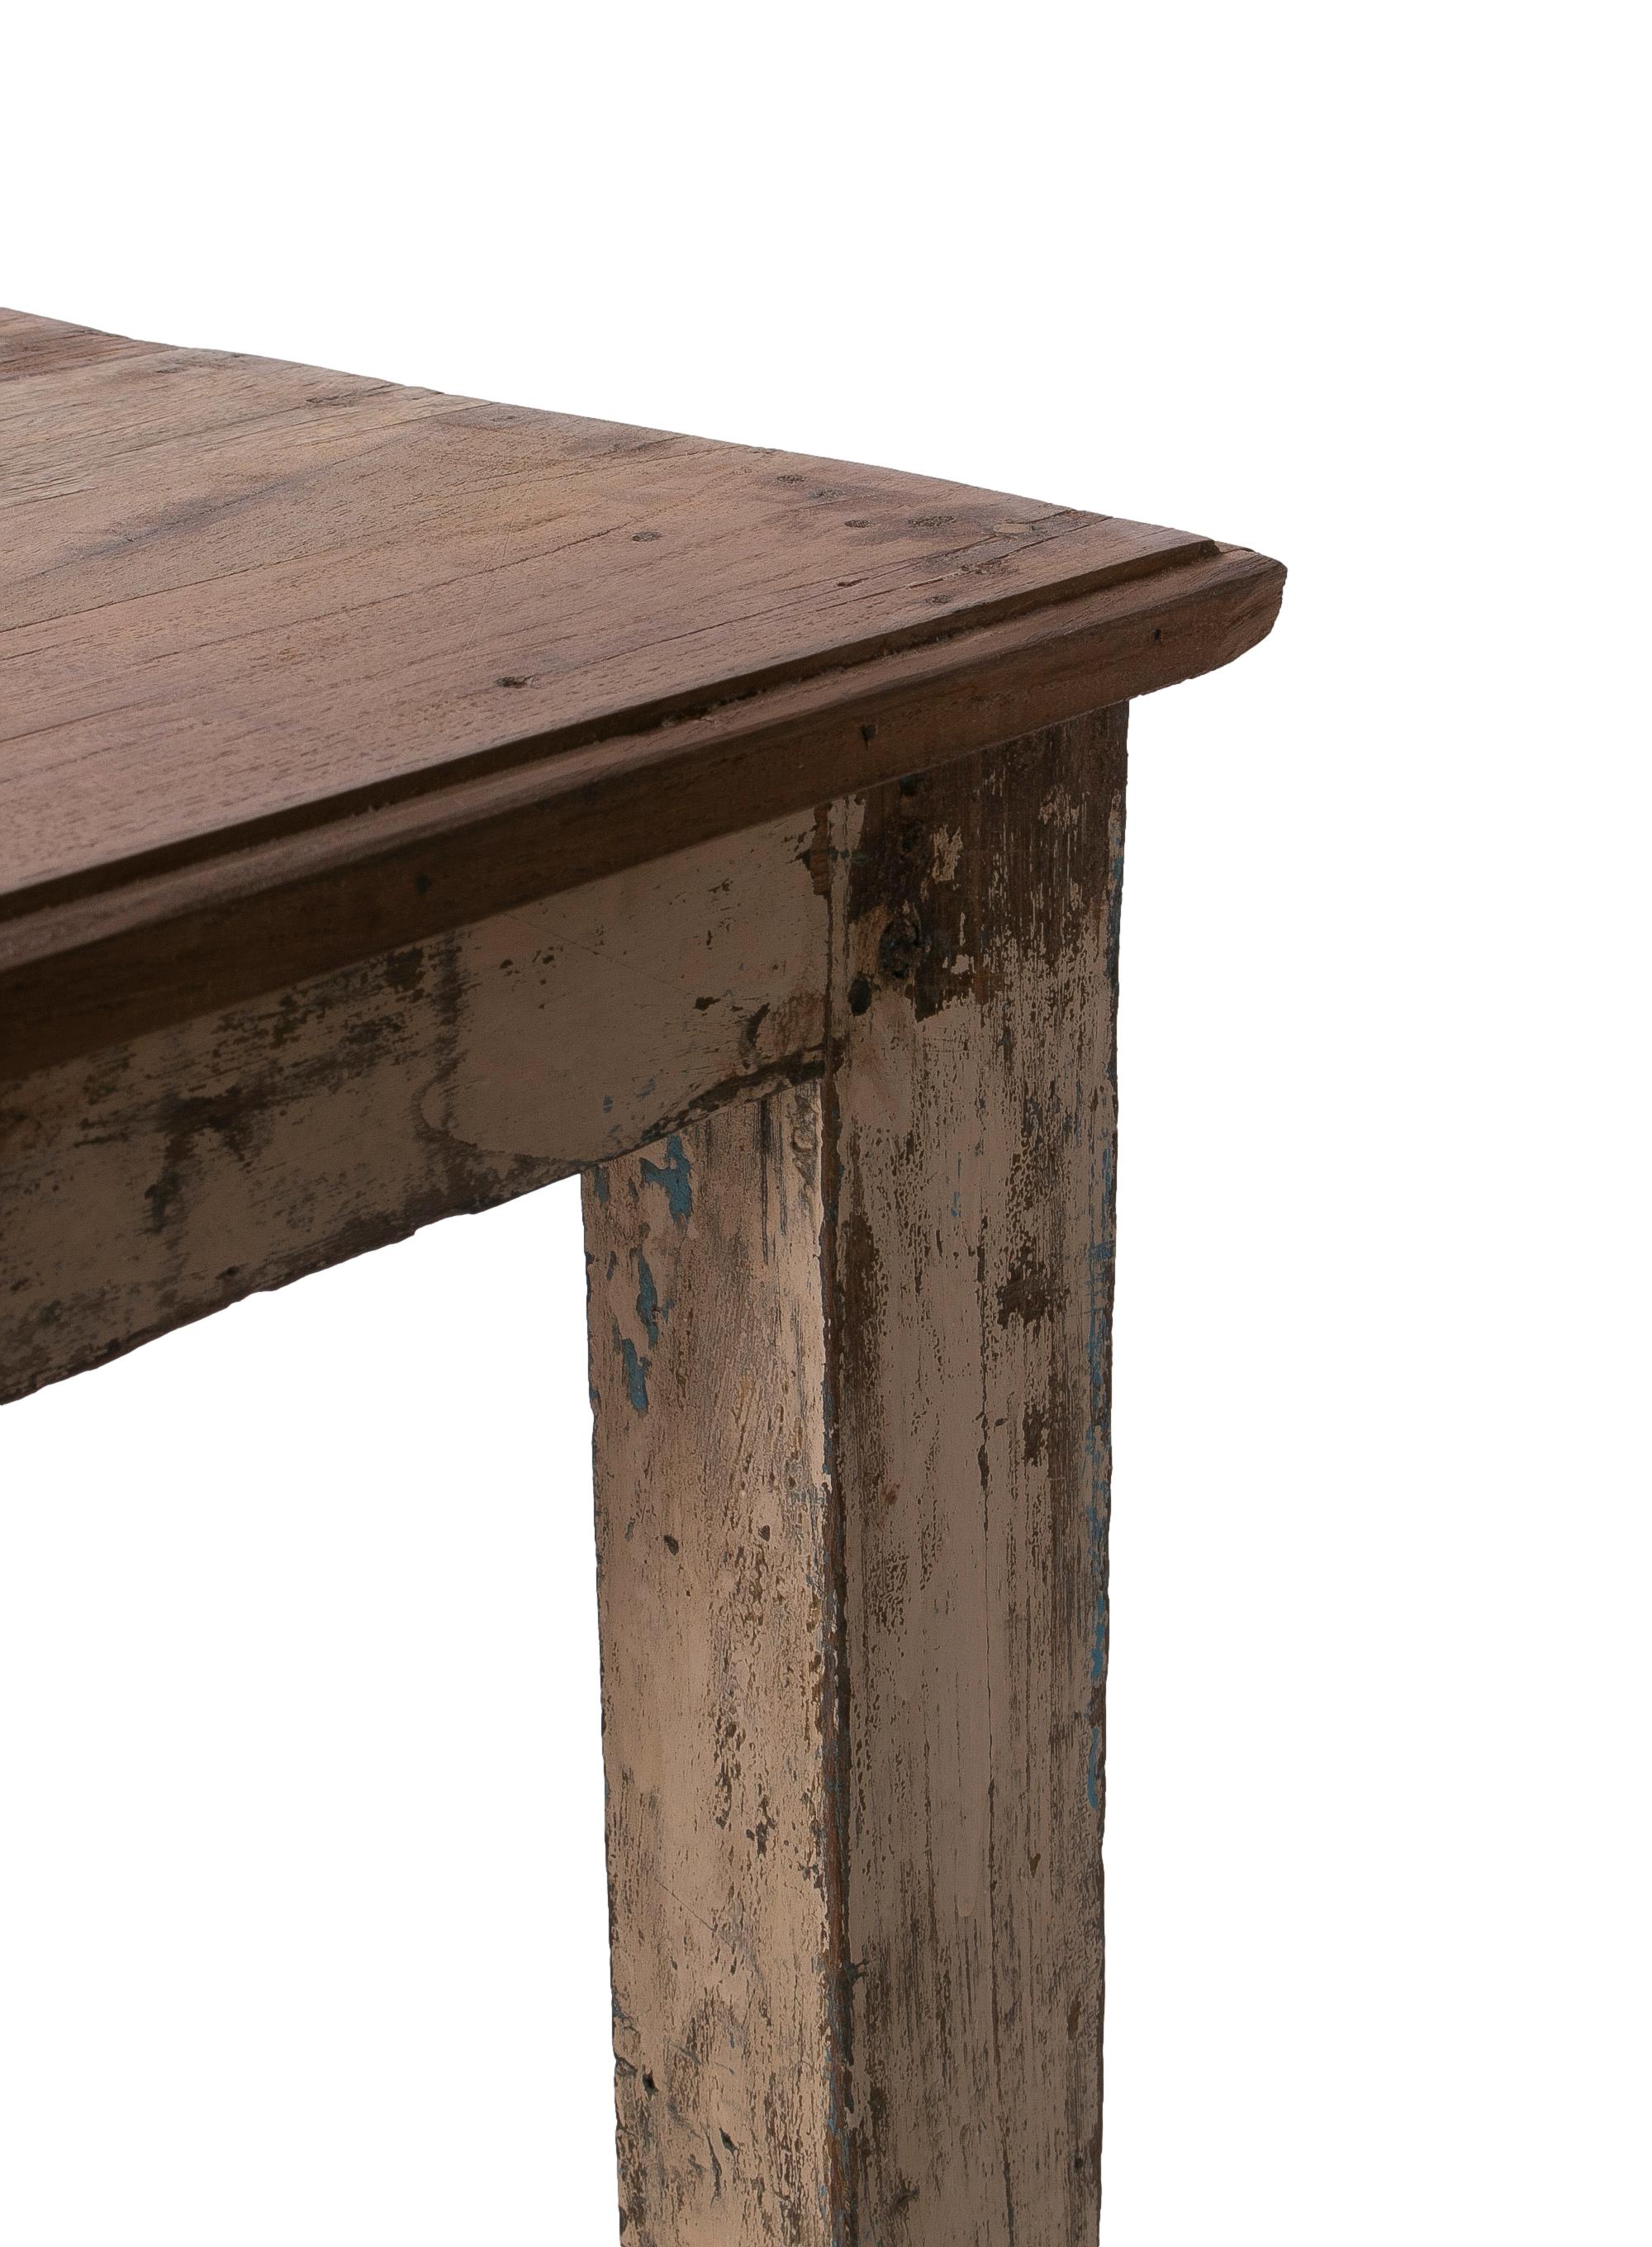 1970s Spanish Industrial Washed Wood Table w/ Crossbeam Legs For Sale 8